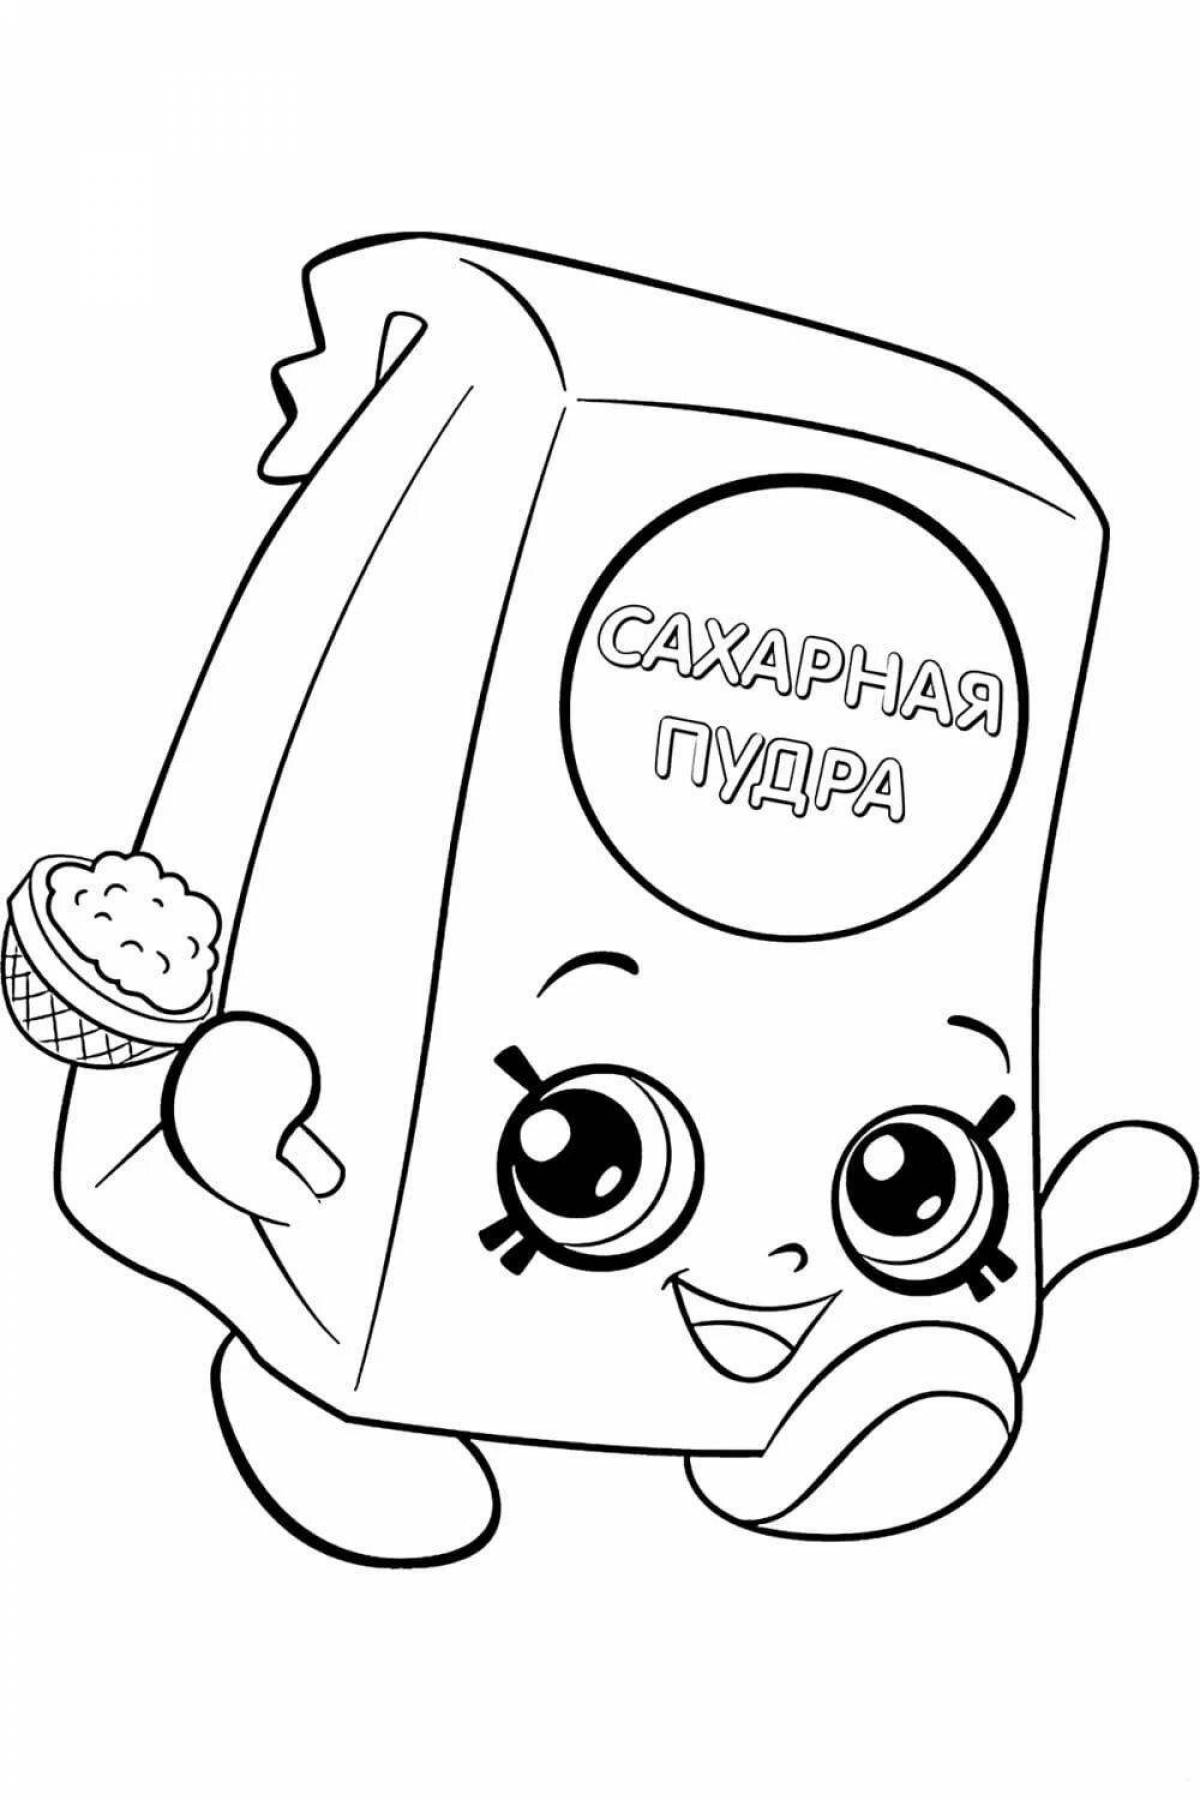 Shopkins shining apple coloring page